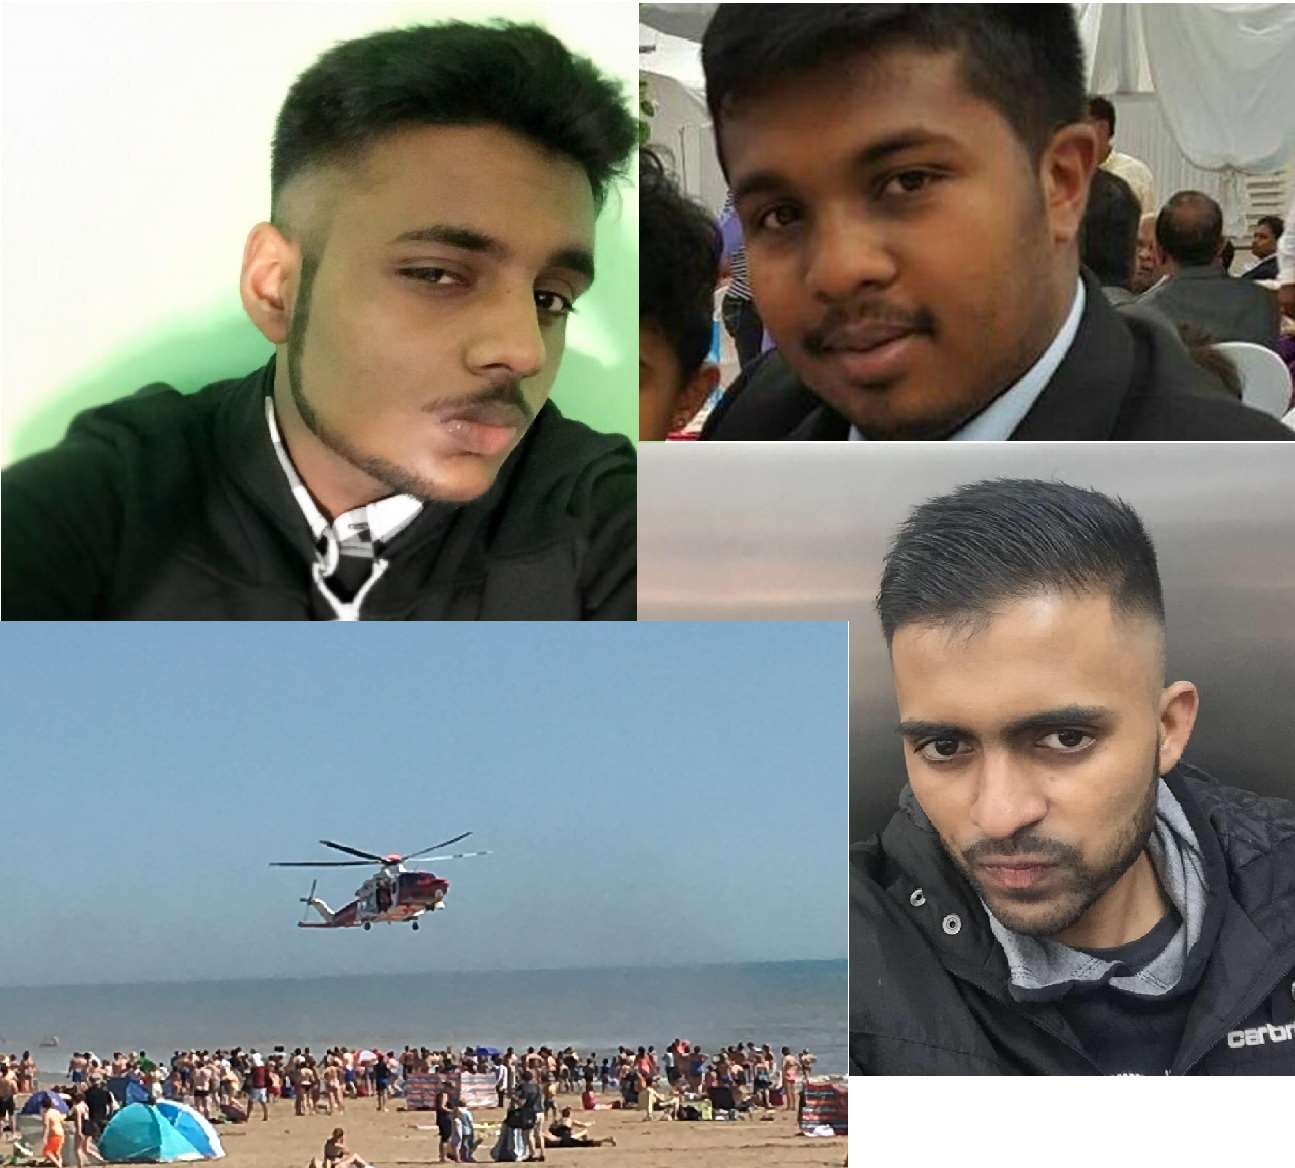 From top left; Ken Nathan, Nitharsan Ravi, and Inthushan Sriskantharaja have all been named locally as the victims